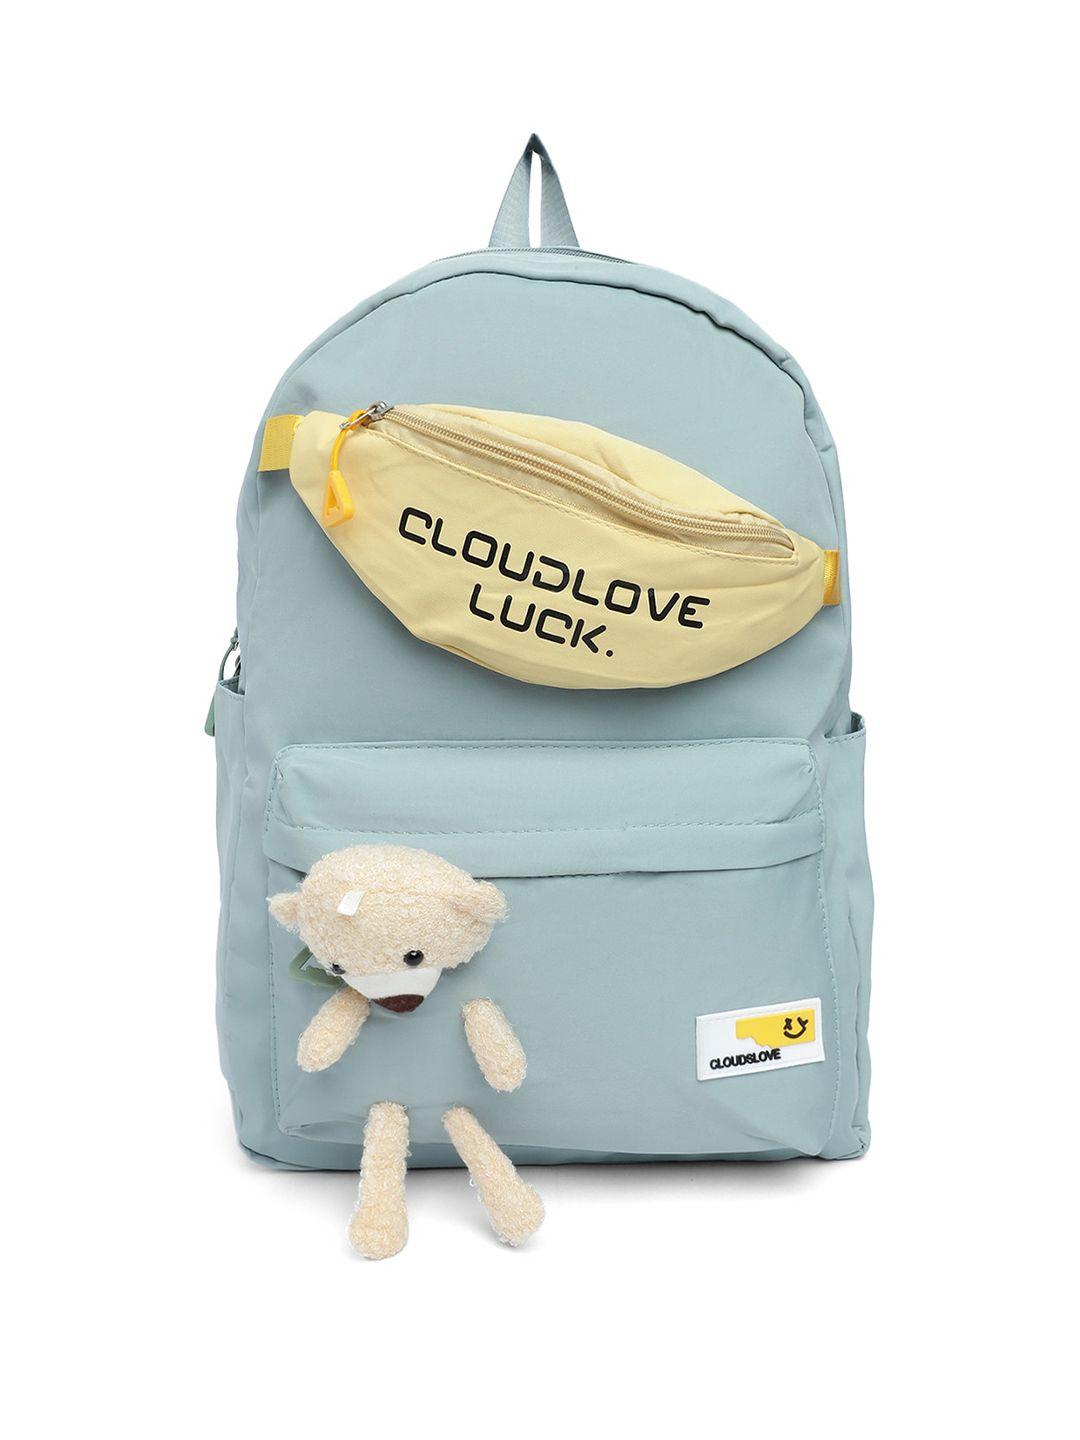 kids on board unisex kids backpack with attached waist bag & teddy